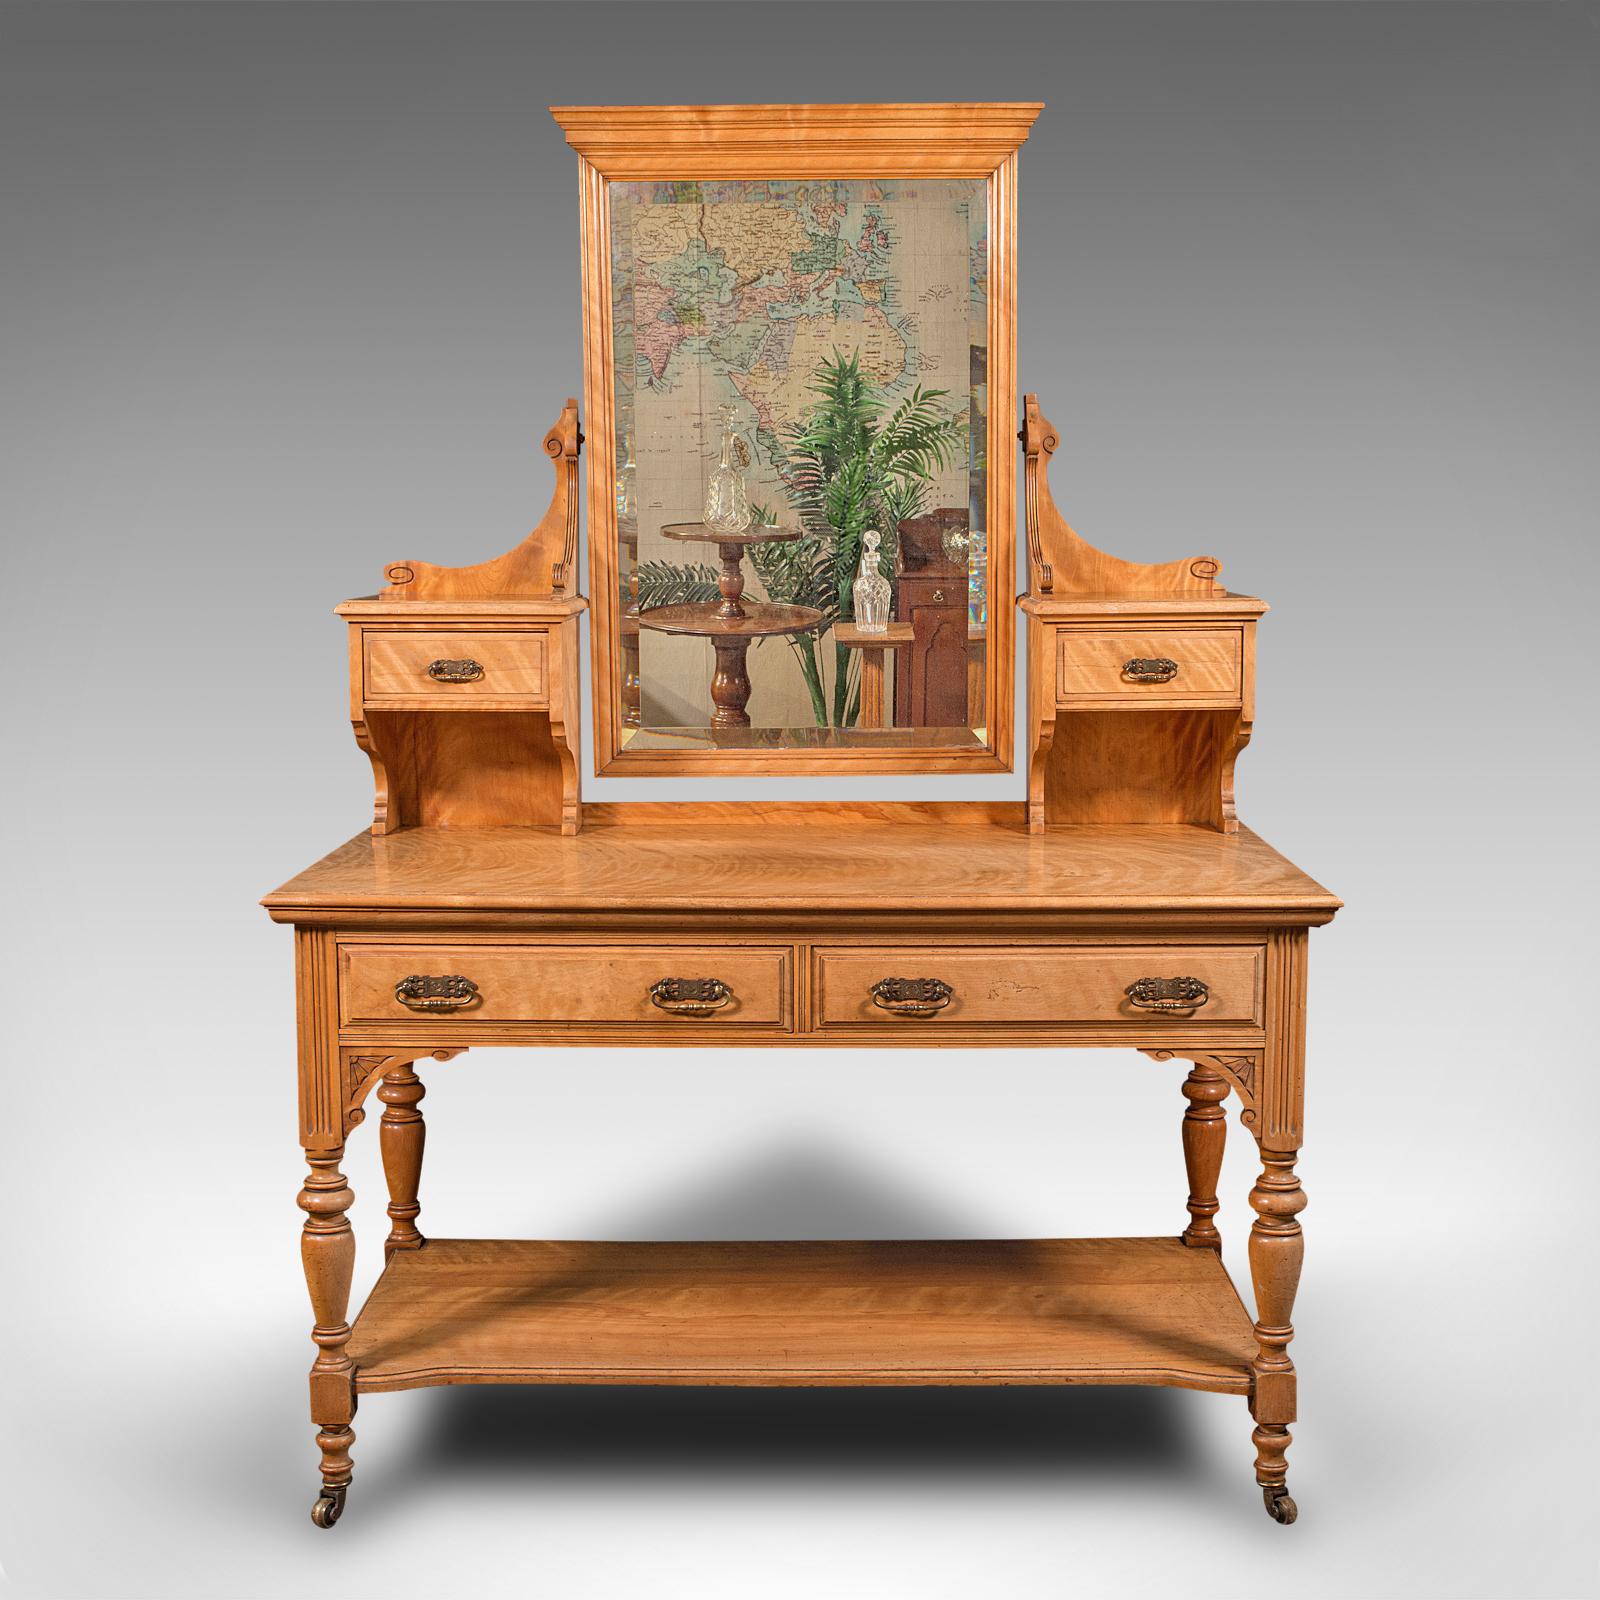 This is a grand antique dressing table. A Scottish, satinwood bedroom vanity stand with mirror by Taylor & Sons of Edinburgh, dating to the late Victorian period, circa 1890.

Impressive proportion and figuring to this striking dressing